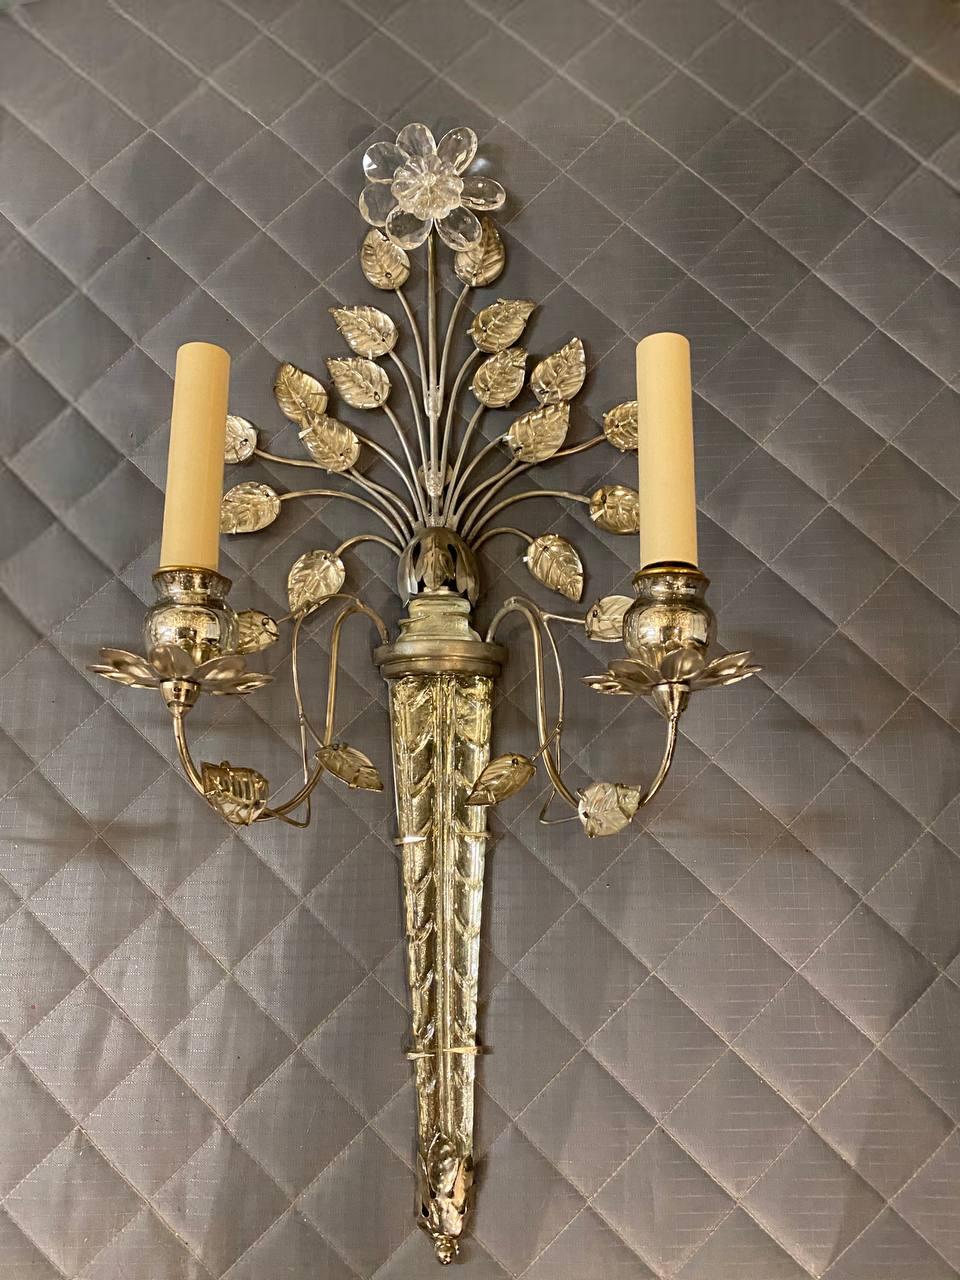 French Provincial 1930’s French Silver Plated Sconces For Sale